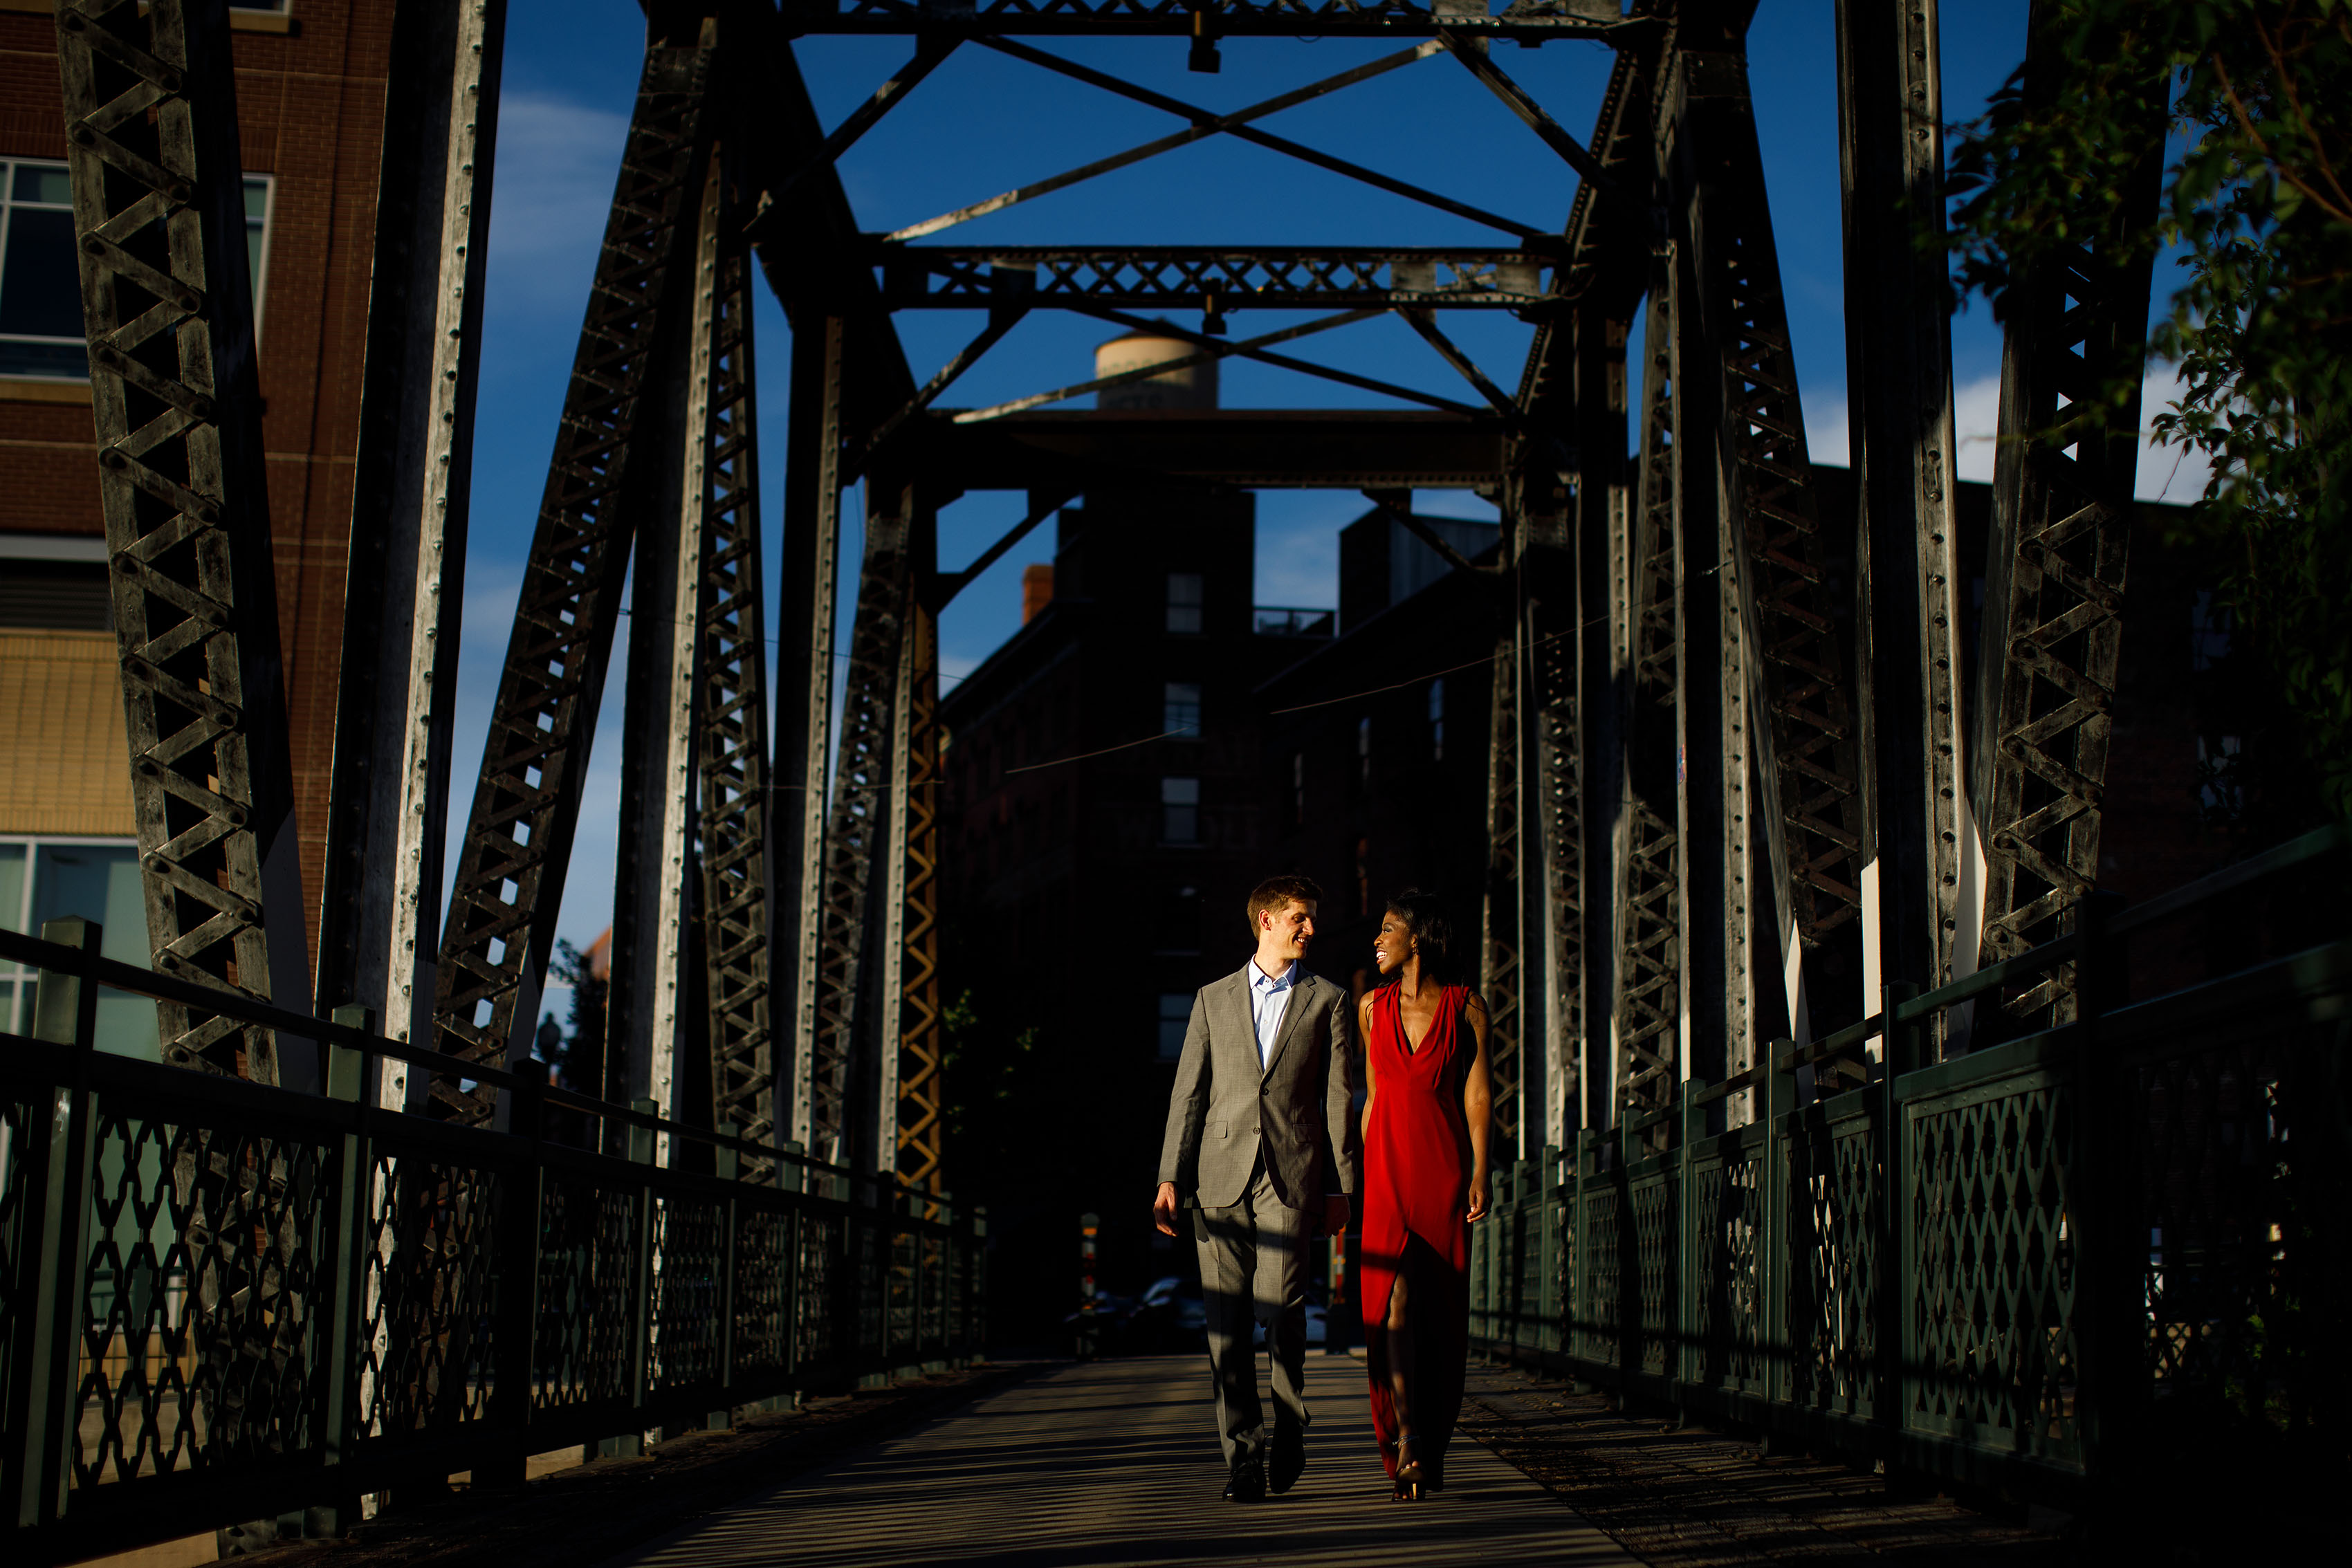 Man in a suit and woman in a red dress walk together at sunset on the Wynkoop Street Bridge